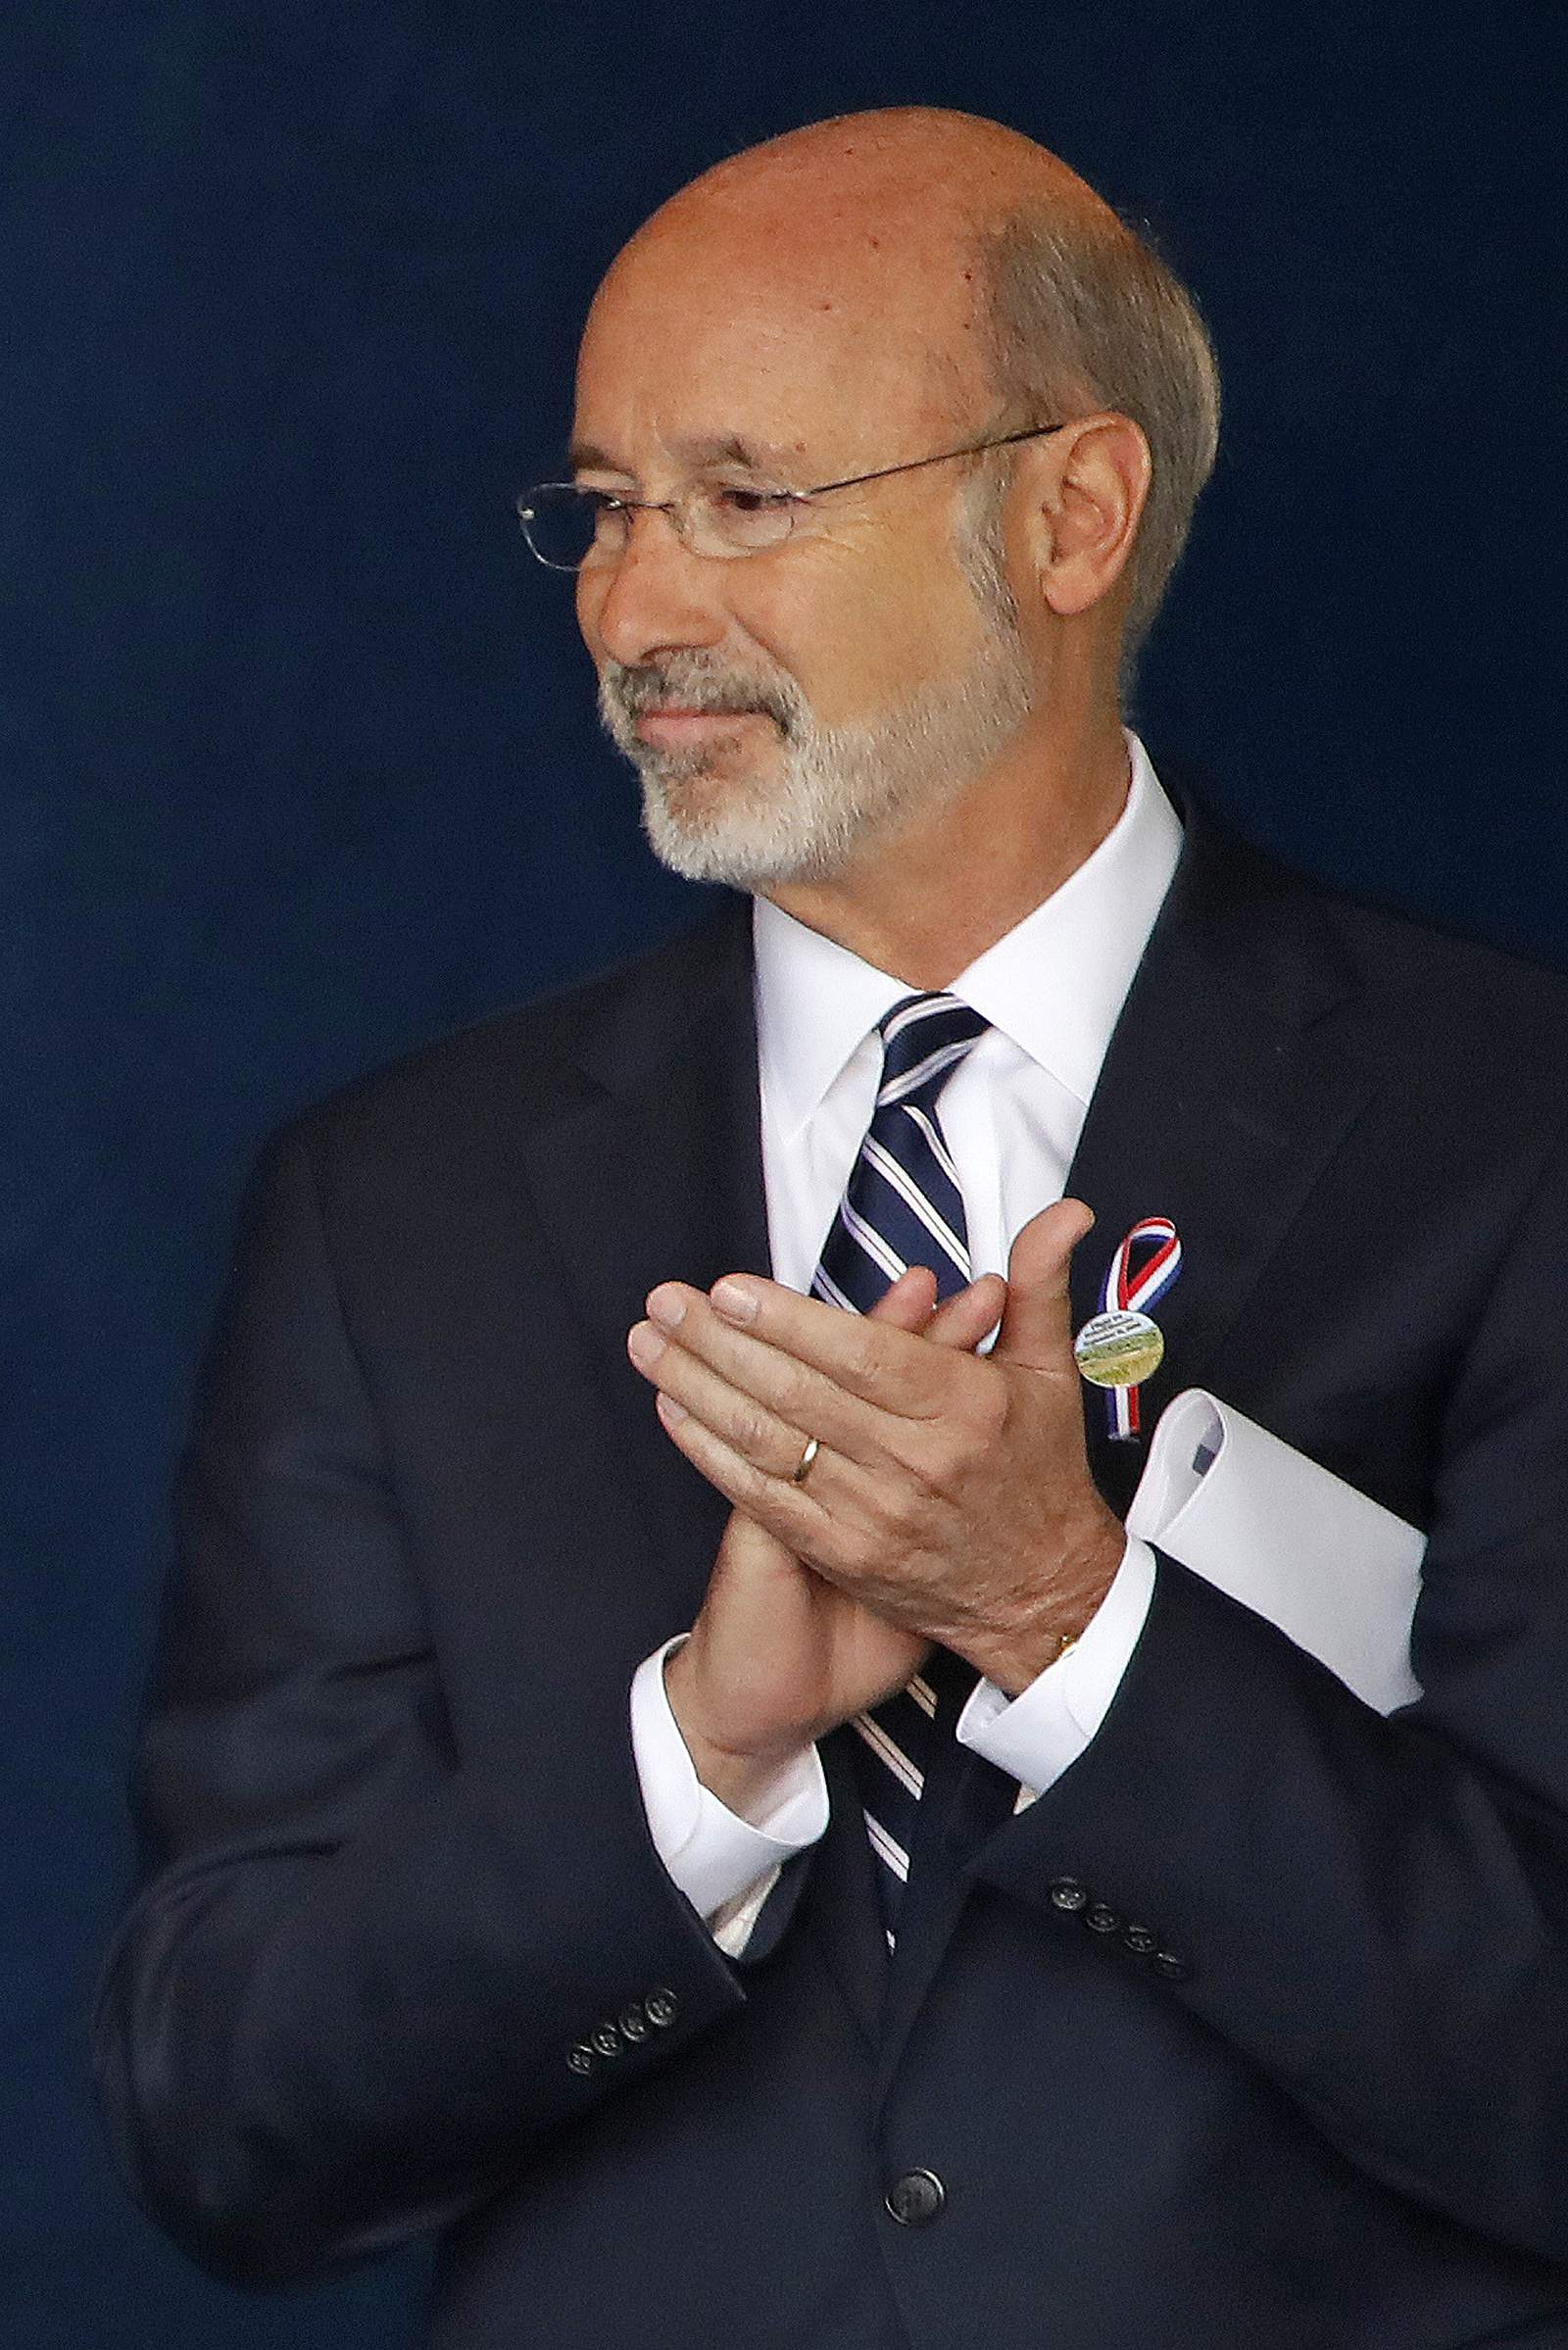 Pennsylvania governor says he's tested positive for COVID-19